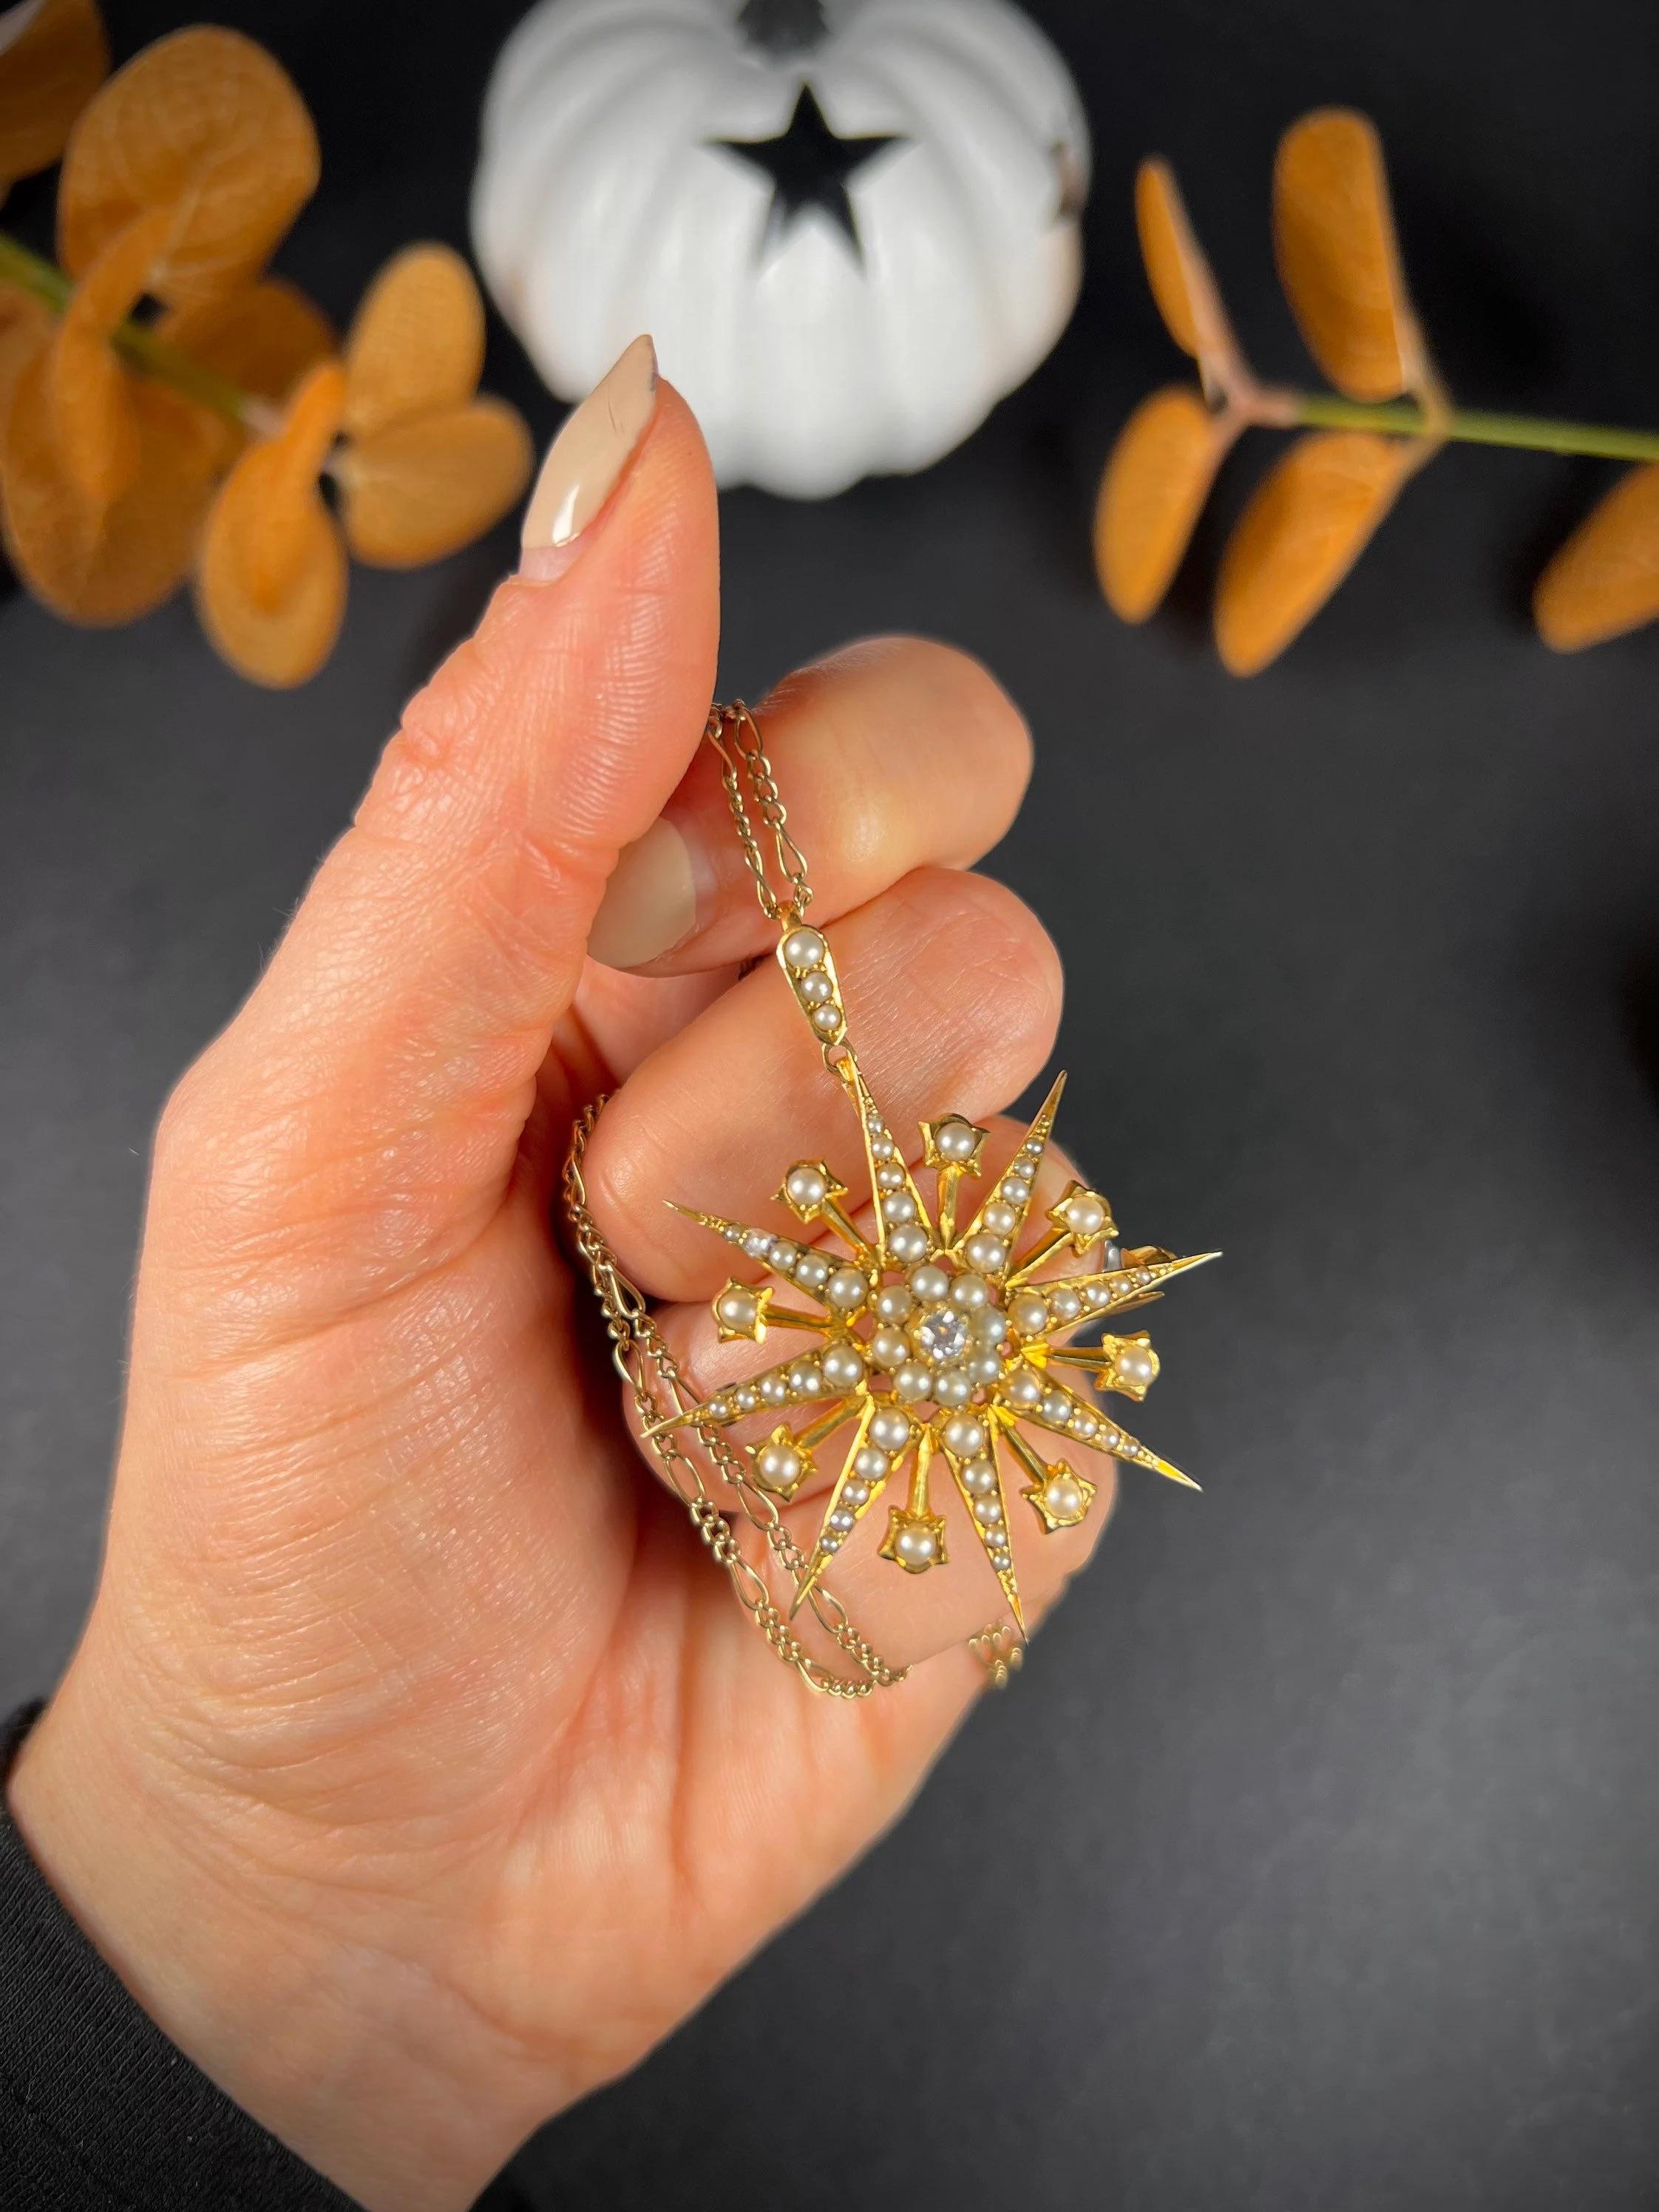 Antique Star Pendant/Brooch

15ct Gold Stamped

Circa 1900

Beautiful, Edwardian eight pointed star. Set with gorgeous natural seed pearls & a twinkling centre diamond. 
Can be worn as both a brooch & a pendant, the bail is removable & simply